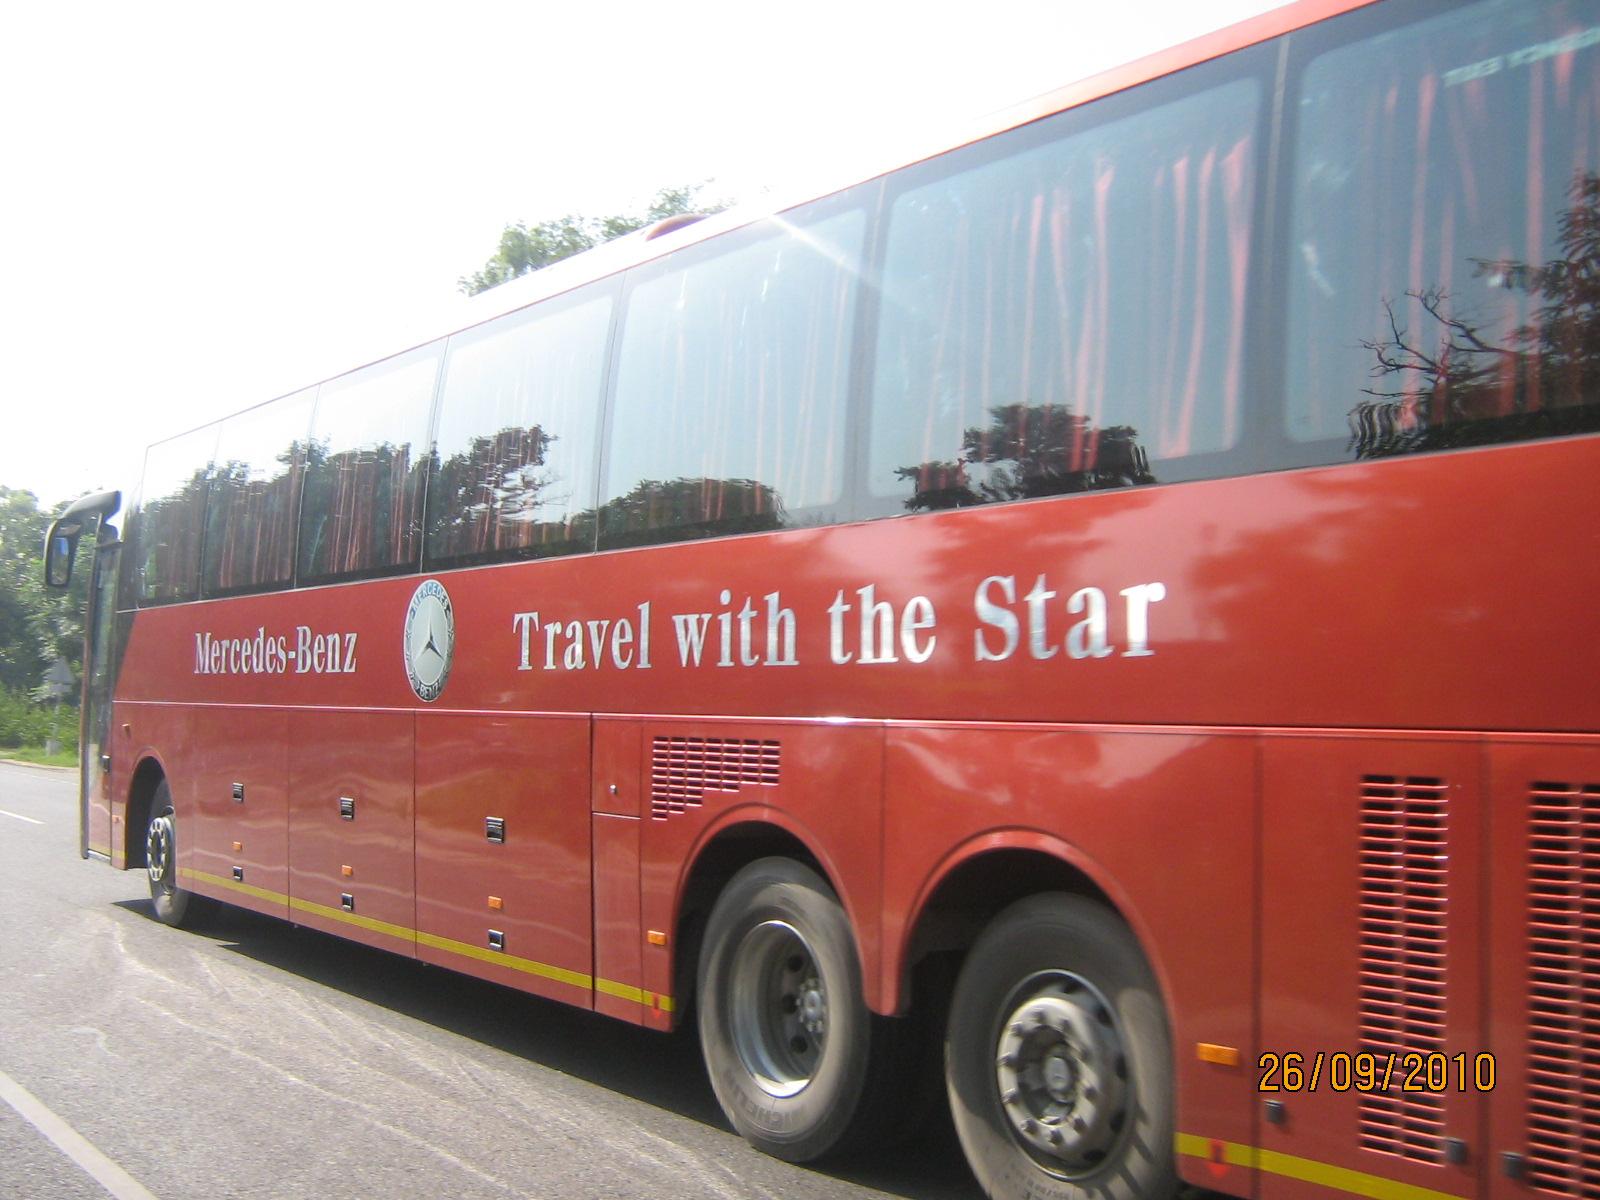 Mercedes benz buses from ludhiana to delhi airport #2